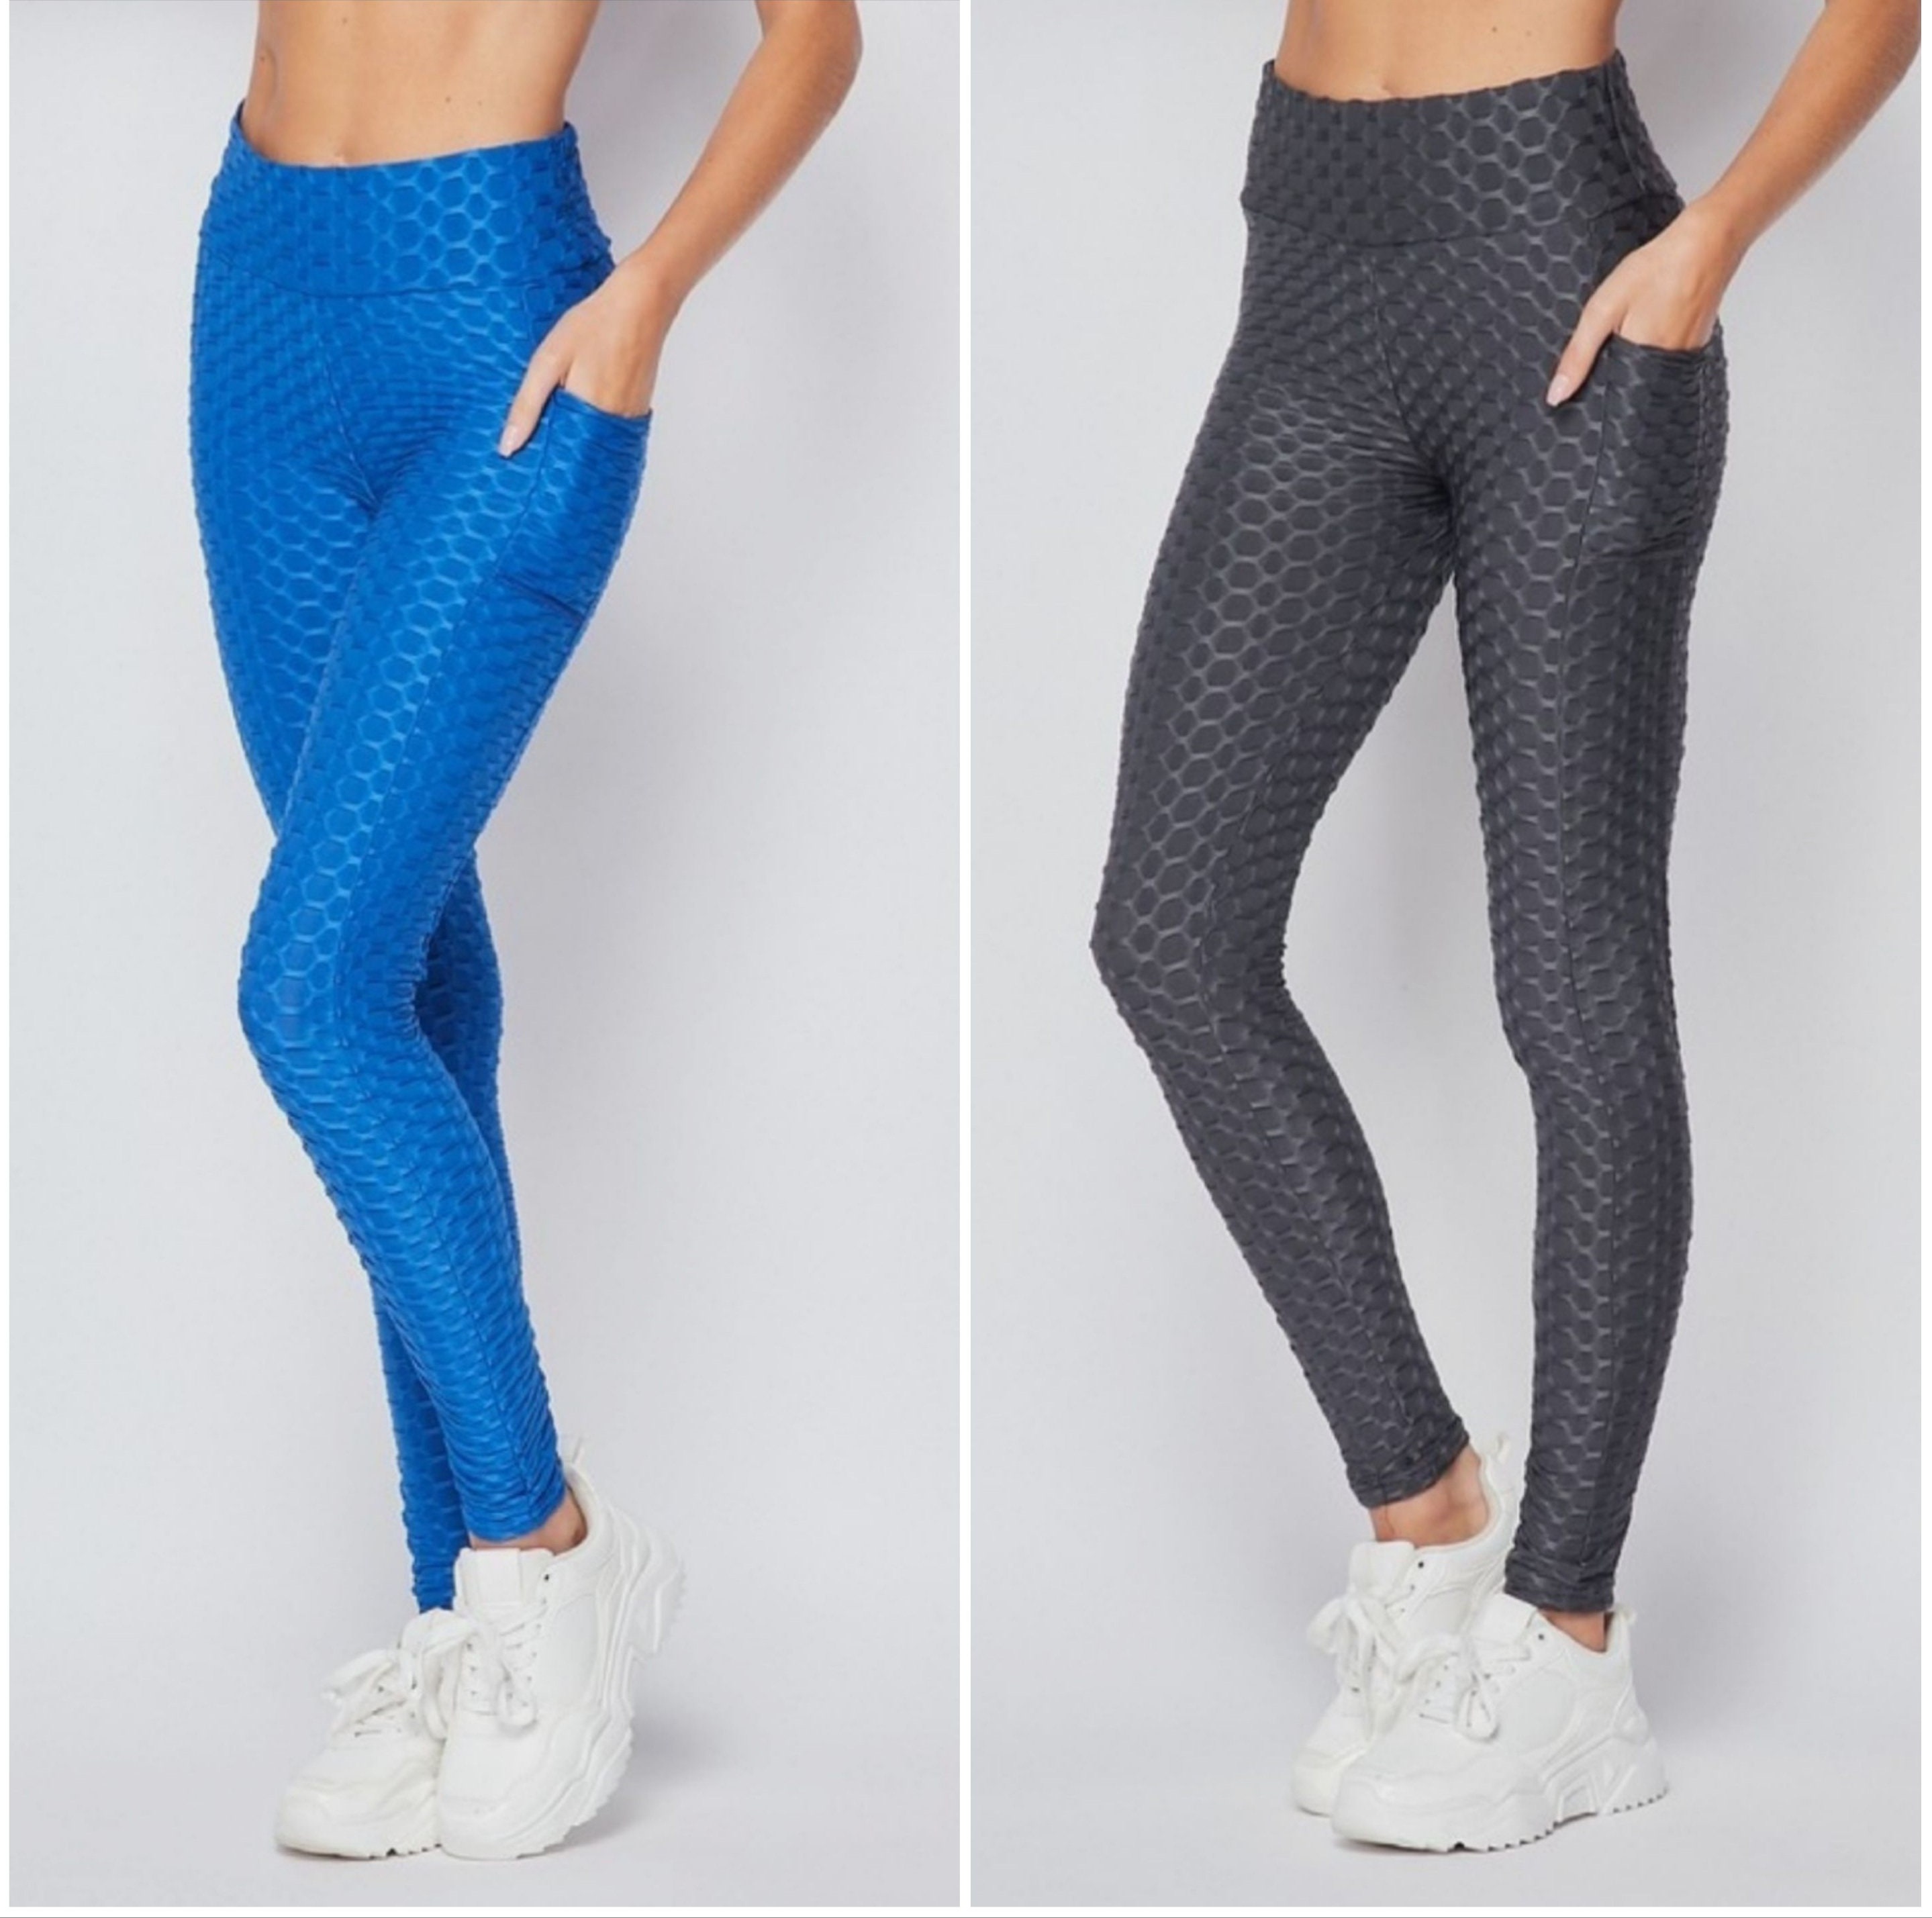 BossedSweat High Waisted Leggings Plus Butt Lifter – Bossed Up